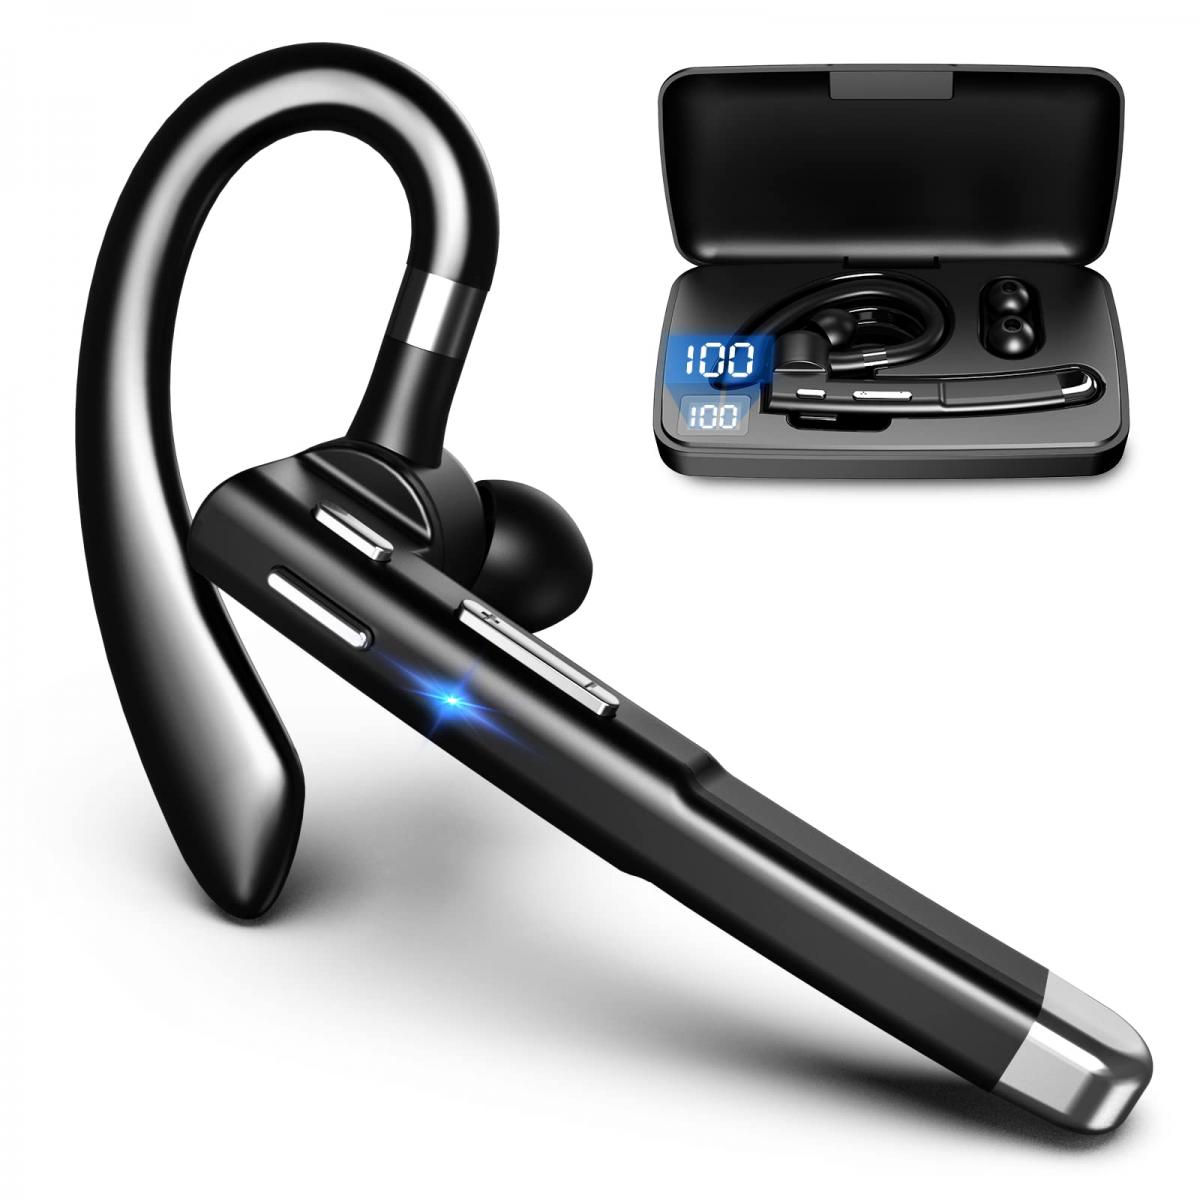 snatch Menstruation Retfærdighed Cell Phone Bluetooth Headphones Bluetooth V5.1 Headphones with Charging  Case Hands-Free Single Ear Headphones with CVC8.0 Noise Cancelling  Microphone for Office/Driving Compatible with Android/iPhone/Laptop -  KENTFAITH